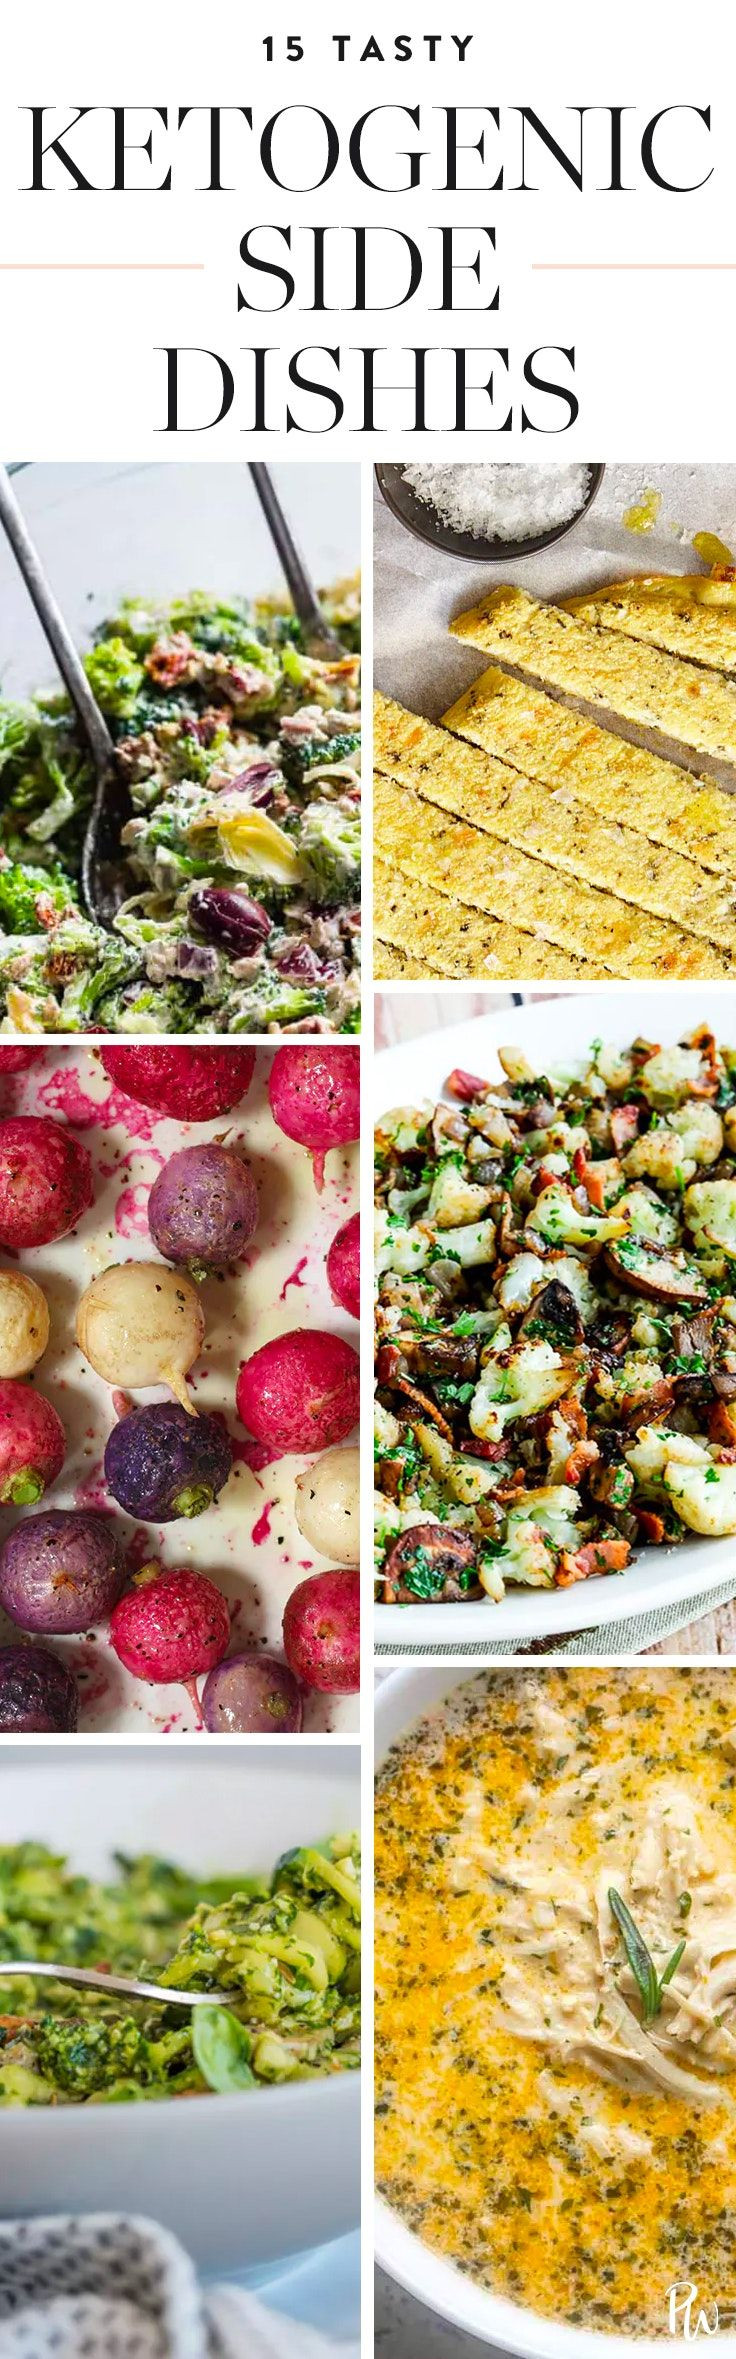 Healthy Keto Side Dishes
 15 Tasty Keto Side Dishes in 2020 With images